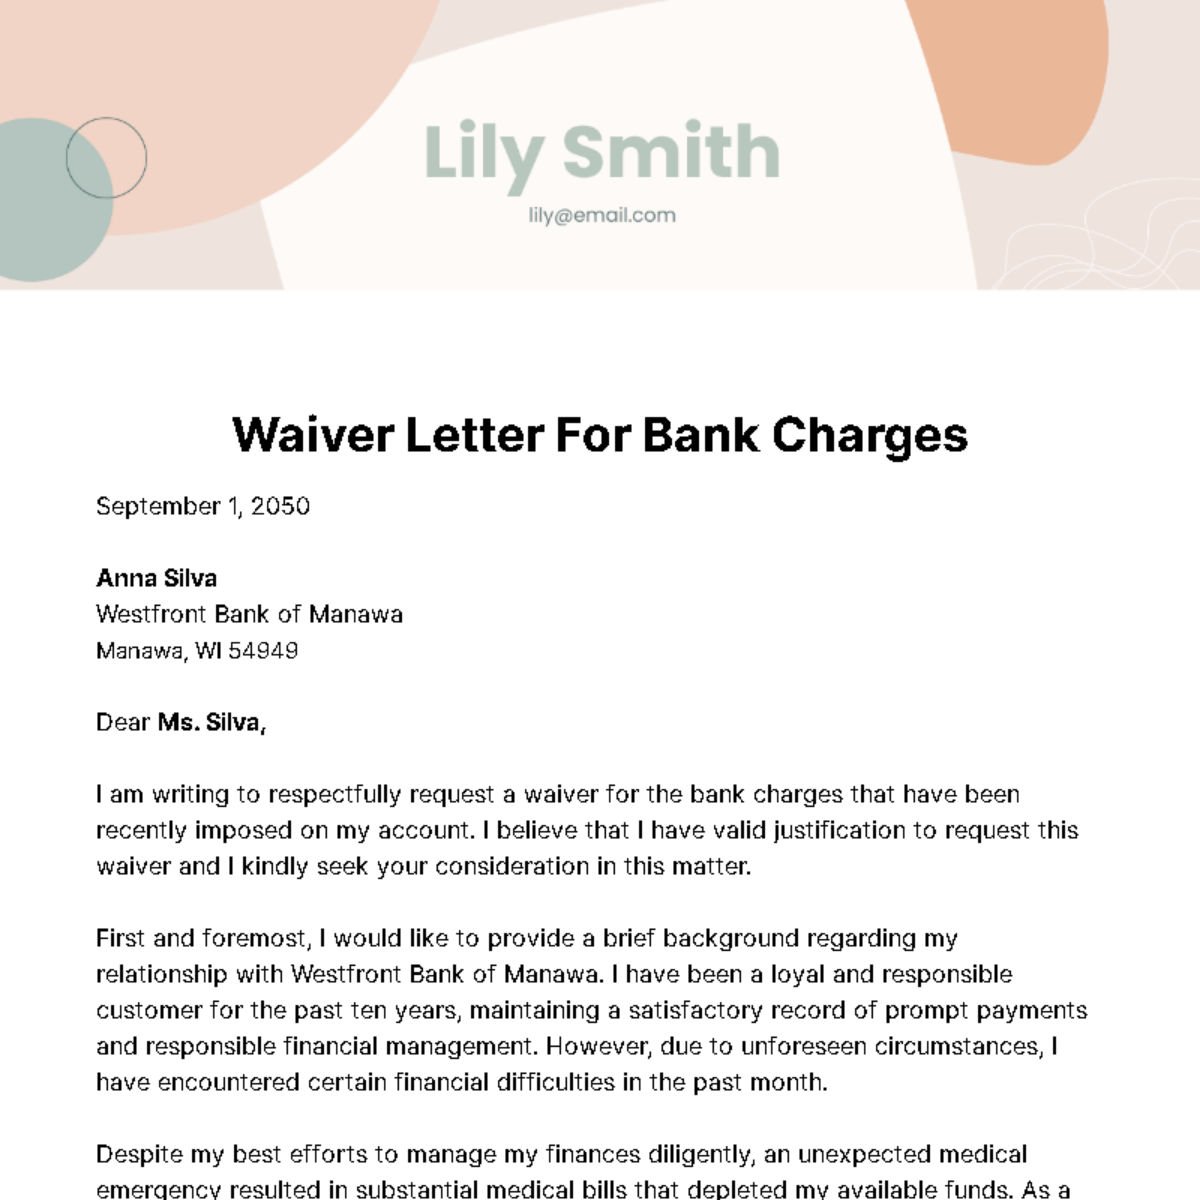 Waiver Letter for Bank Charges Template